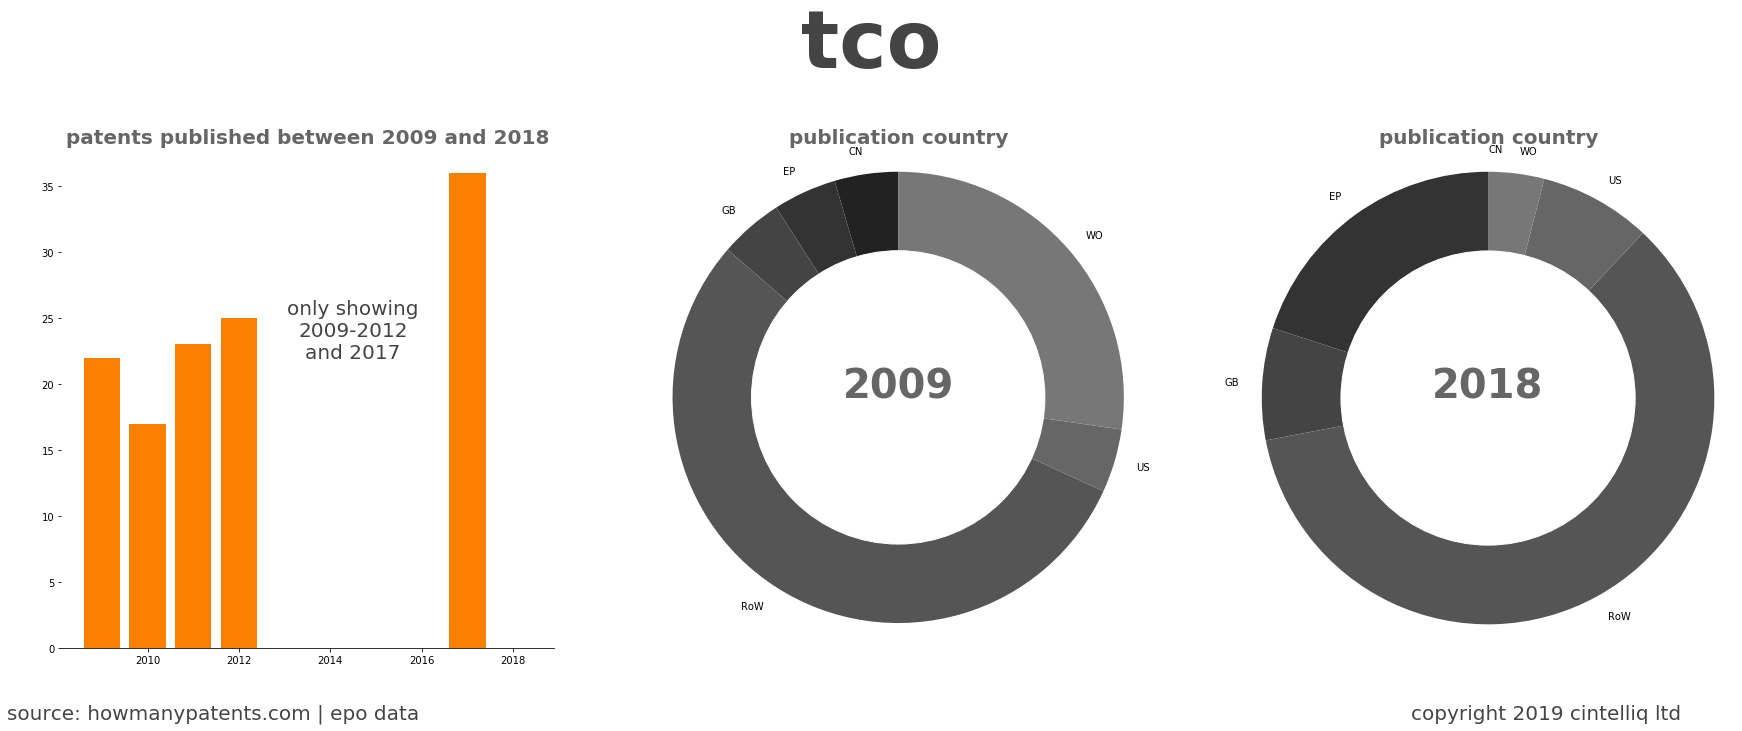 summary of patents for Tco